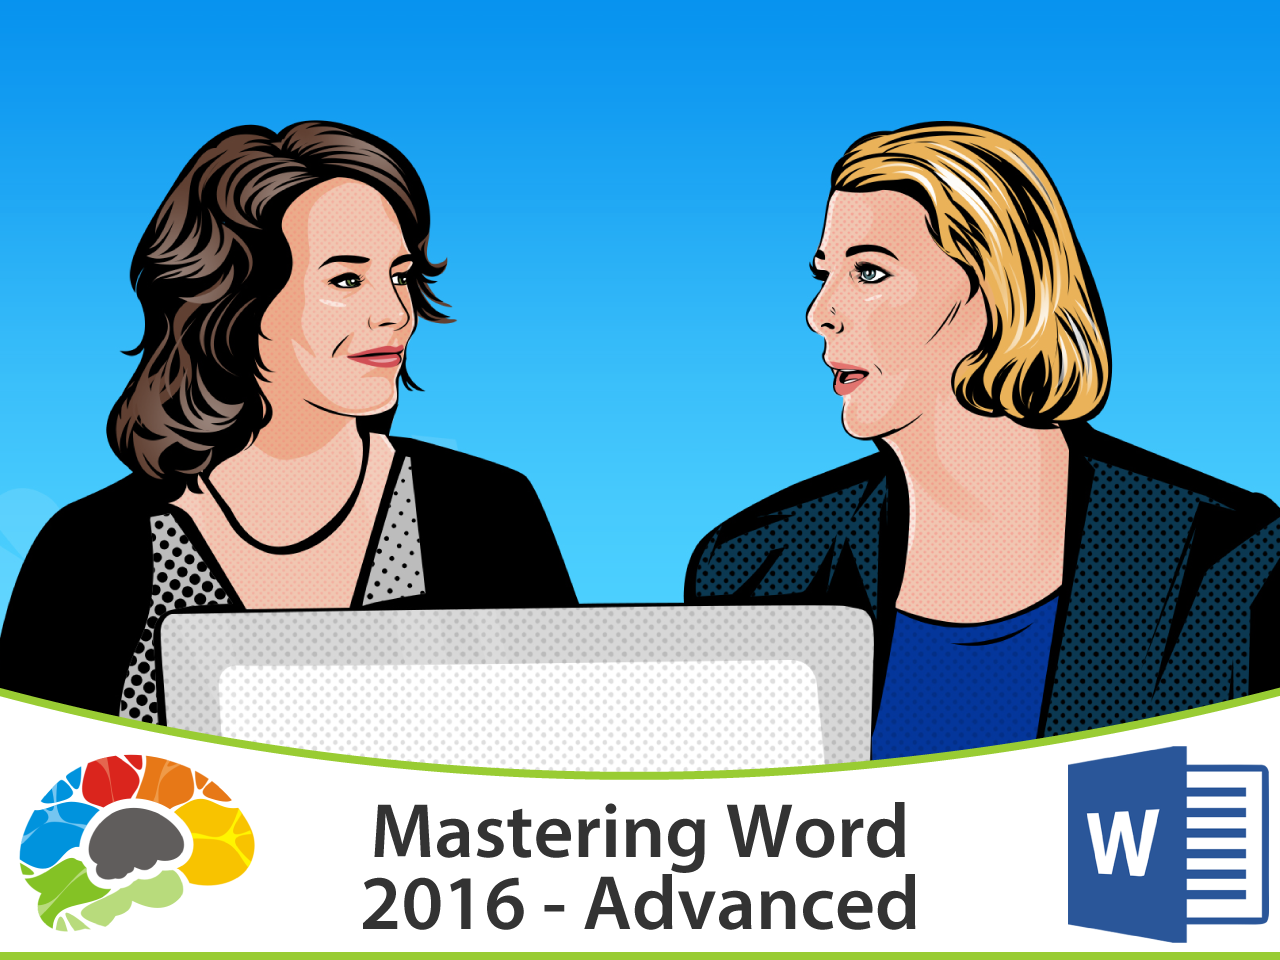 Mastering Word 2016 (full course), Singapore elarning online course